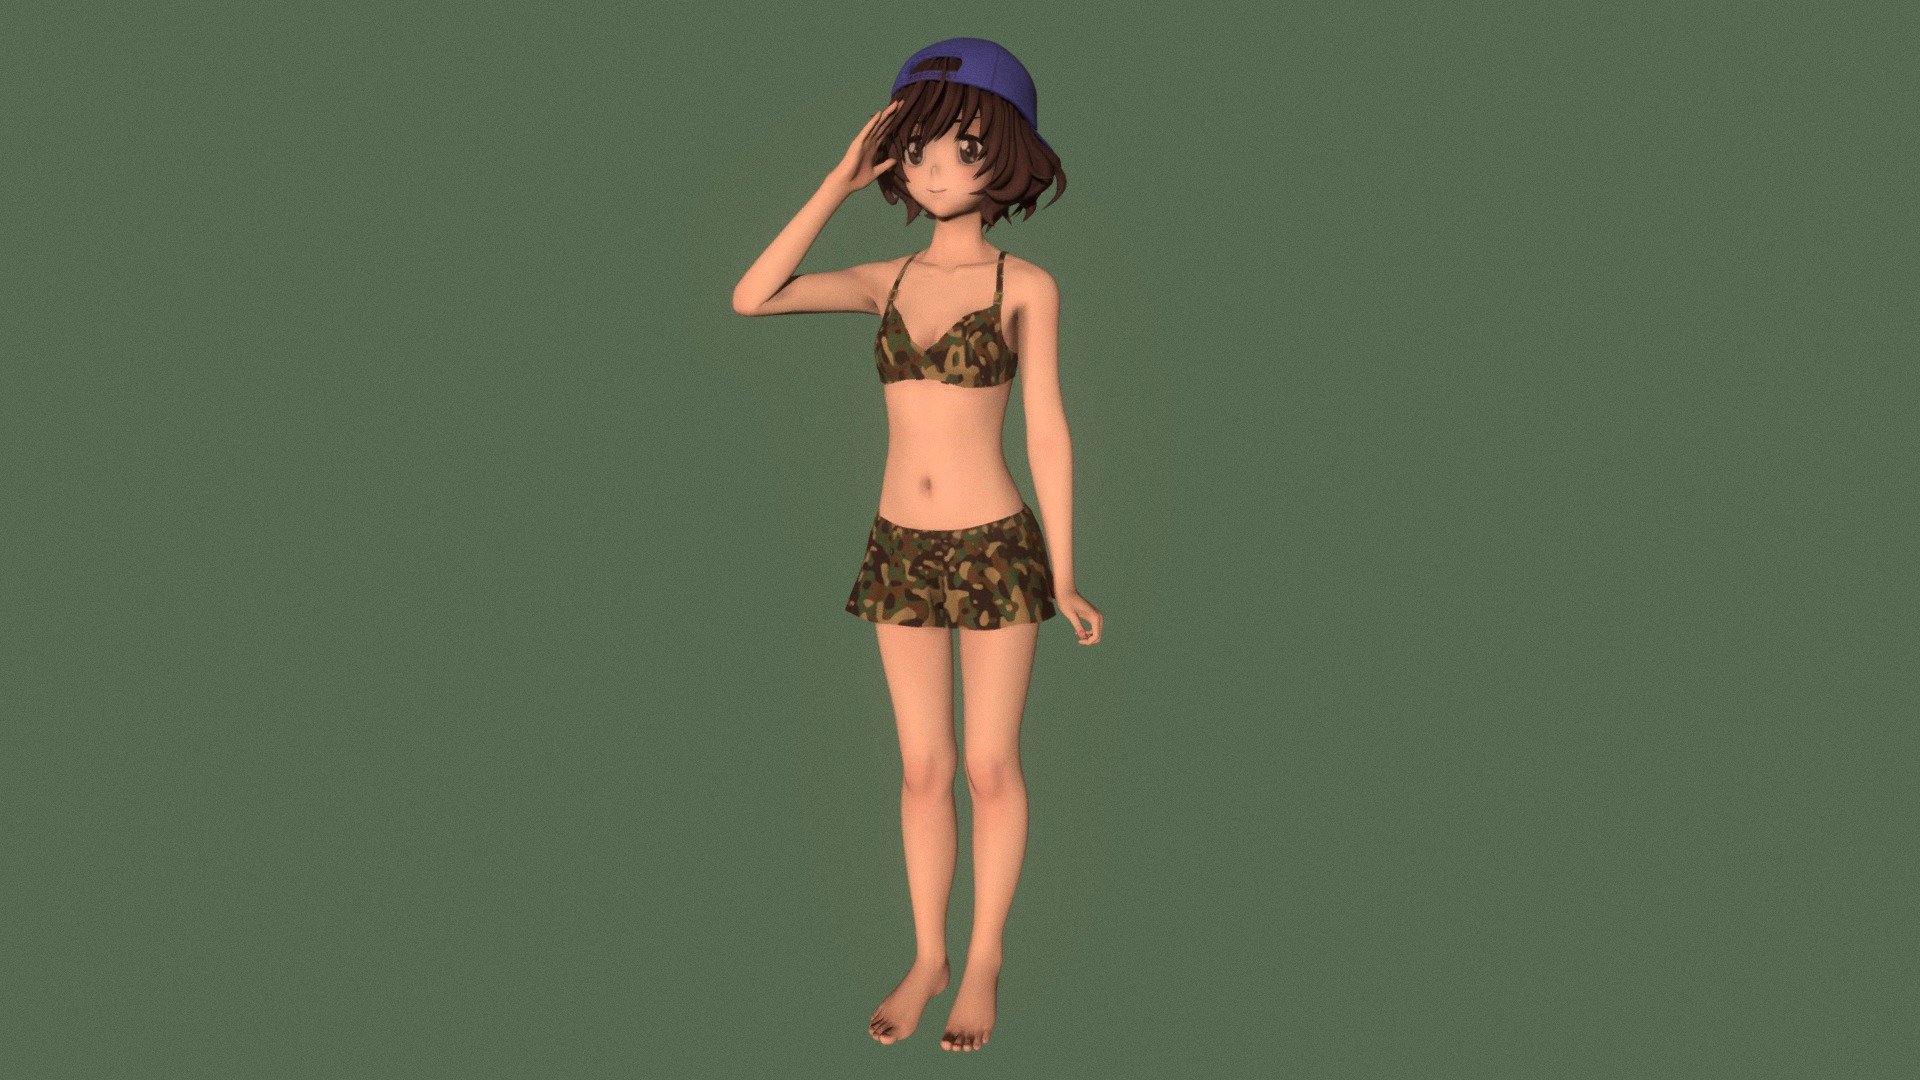 Posed model of anime girl Yukari Akiyama (Girls und Panzer).

This product include .FBX (ver. 7200) and .MAX (ver. 2010) files.

Rigged version: https://sketchfab.com/3d-models/t-pose-rigged-model-of-yukari-akiyama-6d56348e3d36430ba87946b84671b22b

I support convert this 3D model to various file formats: 3DS; AI; ASE; DAE; DWF; DWG; DXF; FLT; HTR; IGS; M3G; MQO; OBJ; SAT; STL; W3D; WRL; X.

You can buy all of my models in one pack to save cost: https://sketchfab.com/3d-models/all-of-my-anime-girls-c5a56156994e4193b9e8fa21a3b8360b

And I can make commission models.

If you have any questions, please leave a comment or contact me via my email 3d.eden.project@gmail.com 3d model